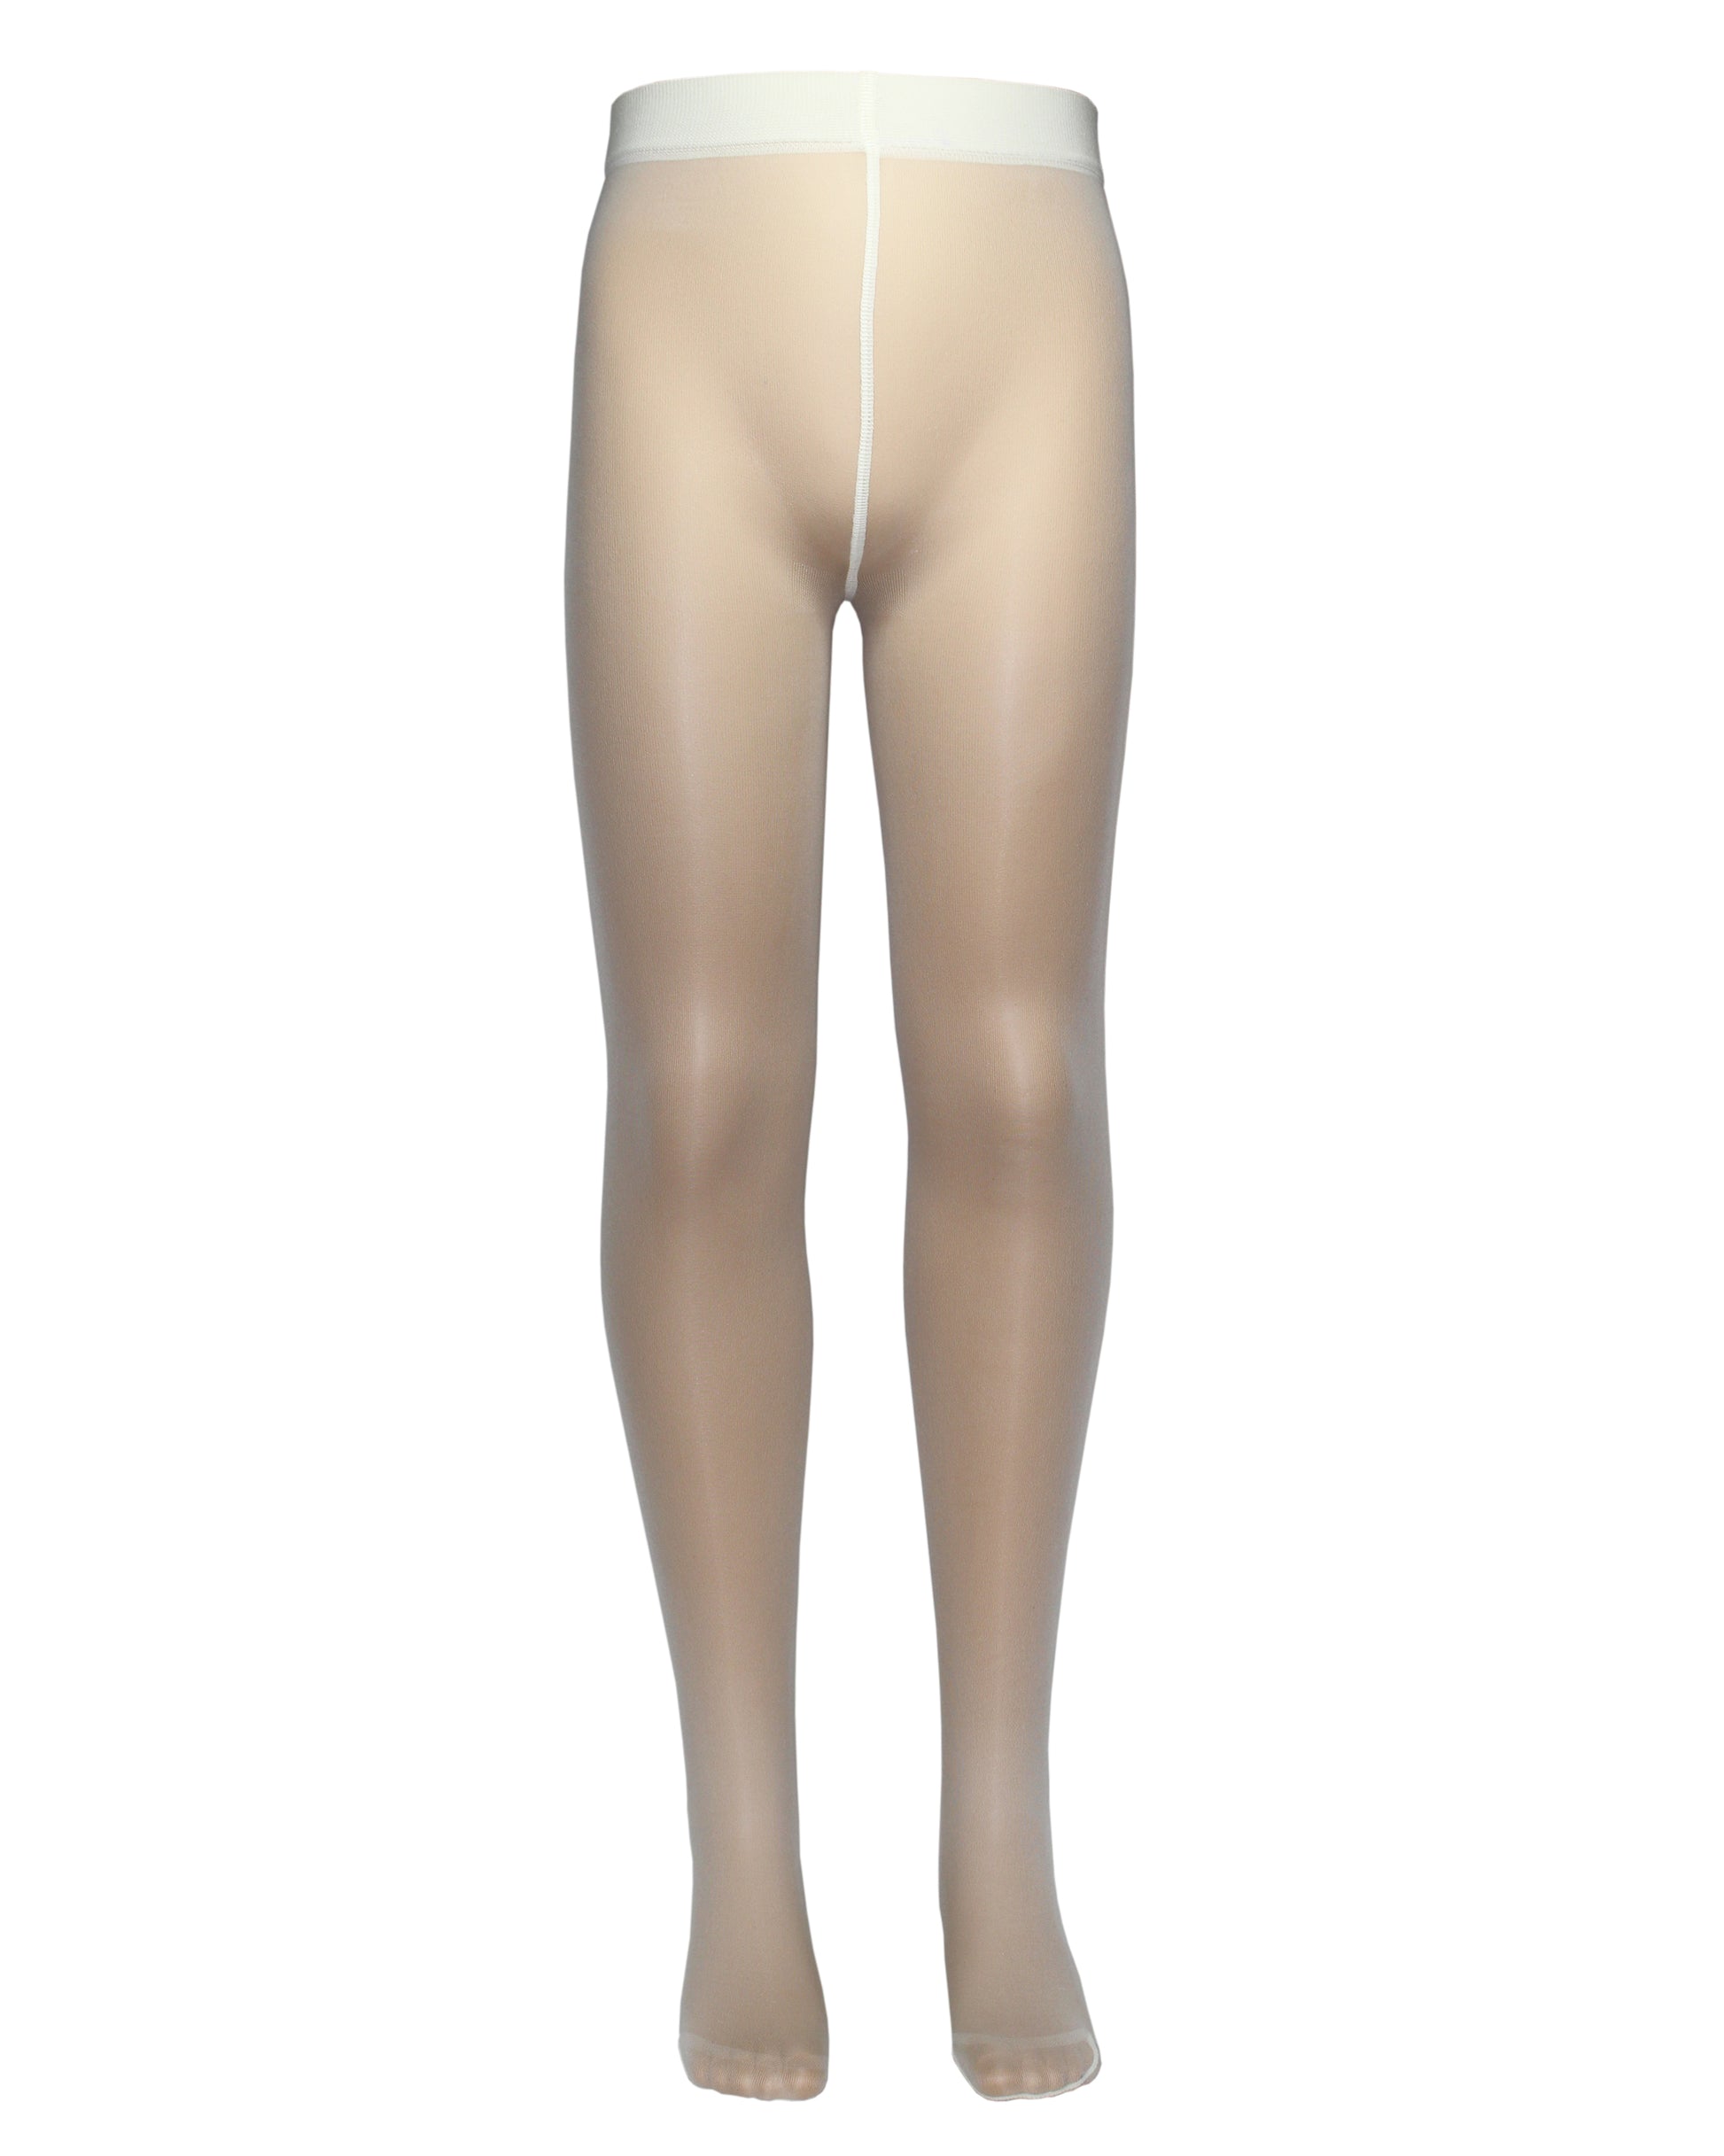 Omsa MiniVelour 25 Collant - Soft and matte semi sheer plain kid's tights in ivory cream.